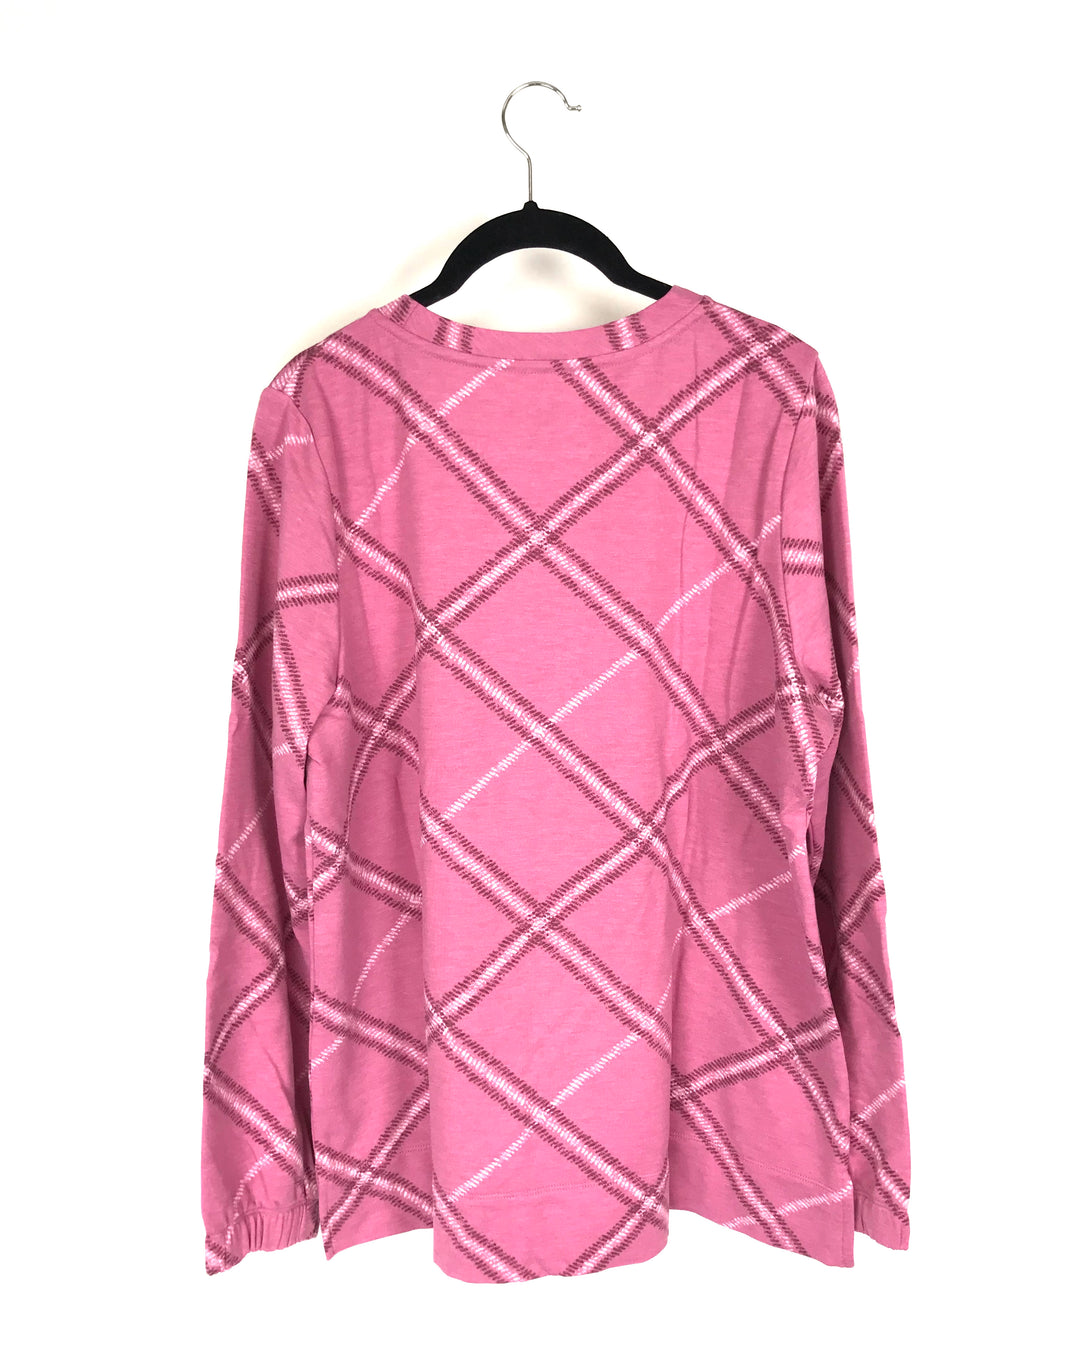 Long Sleeve Pink Top - Extra Small and Small